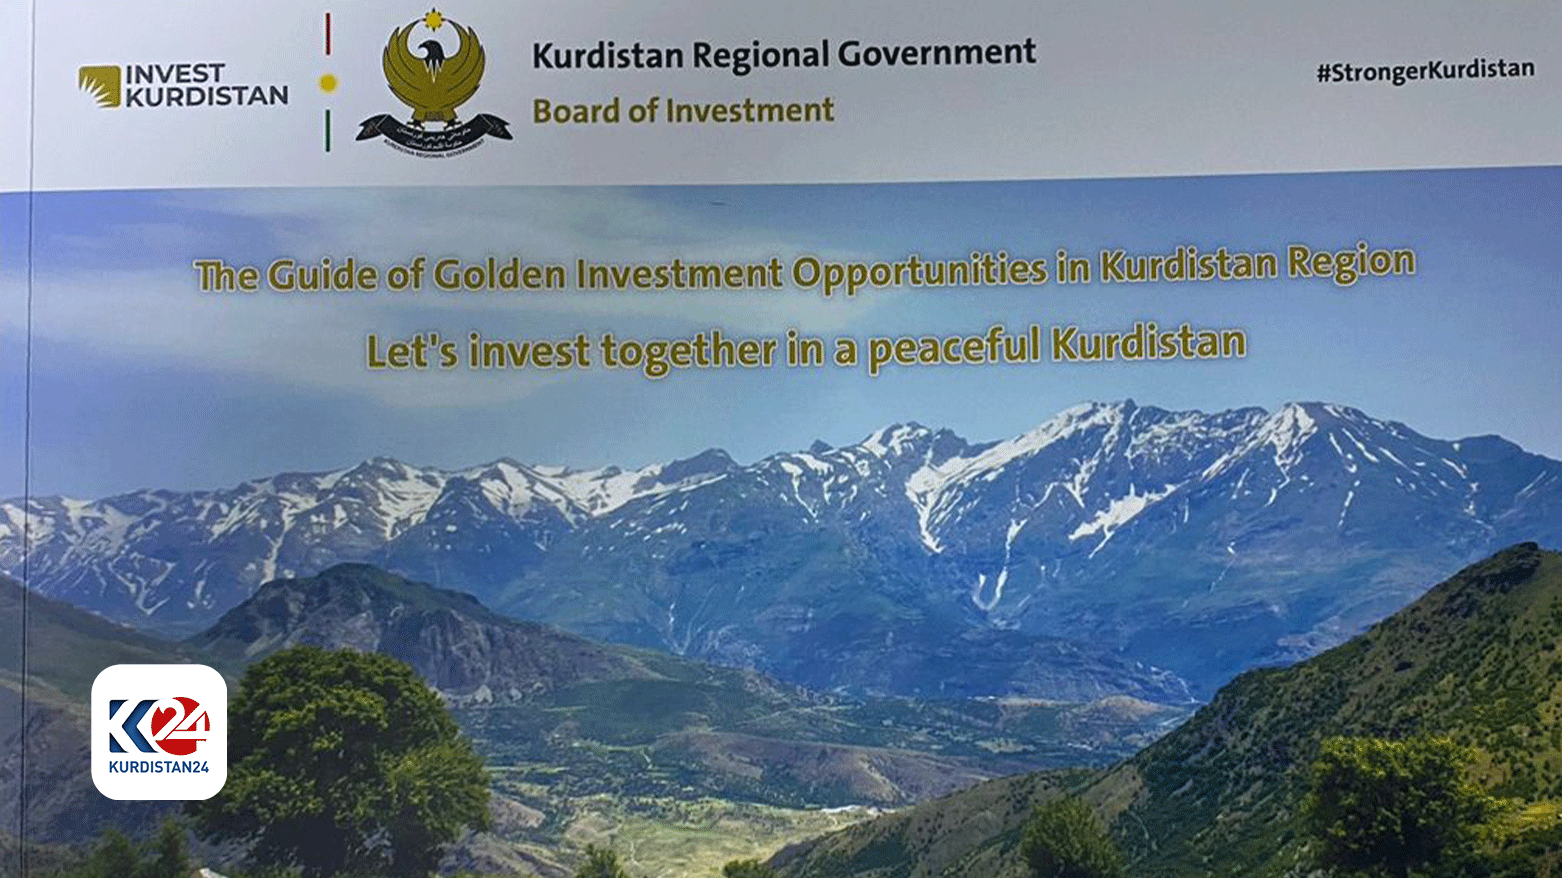 KRG publishes Guide of Golden Investment Opportunities